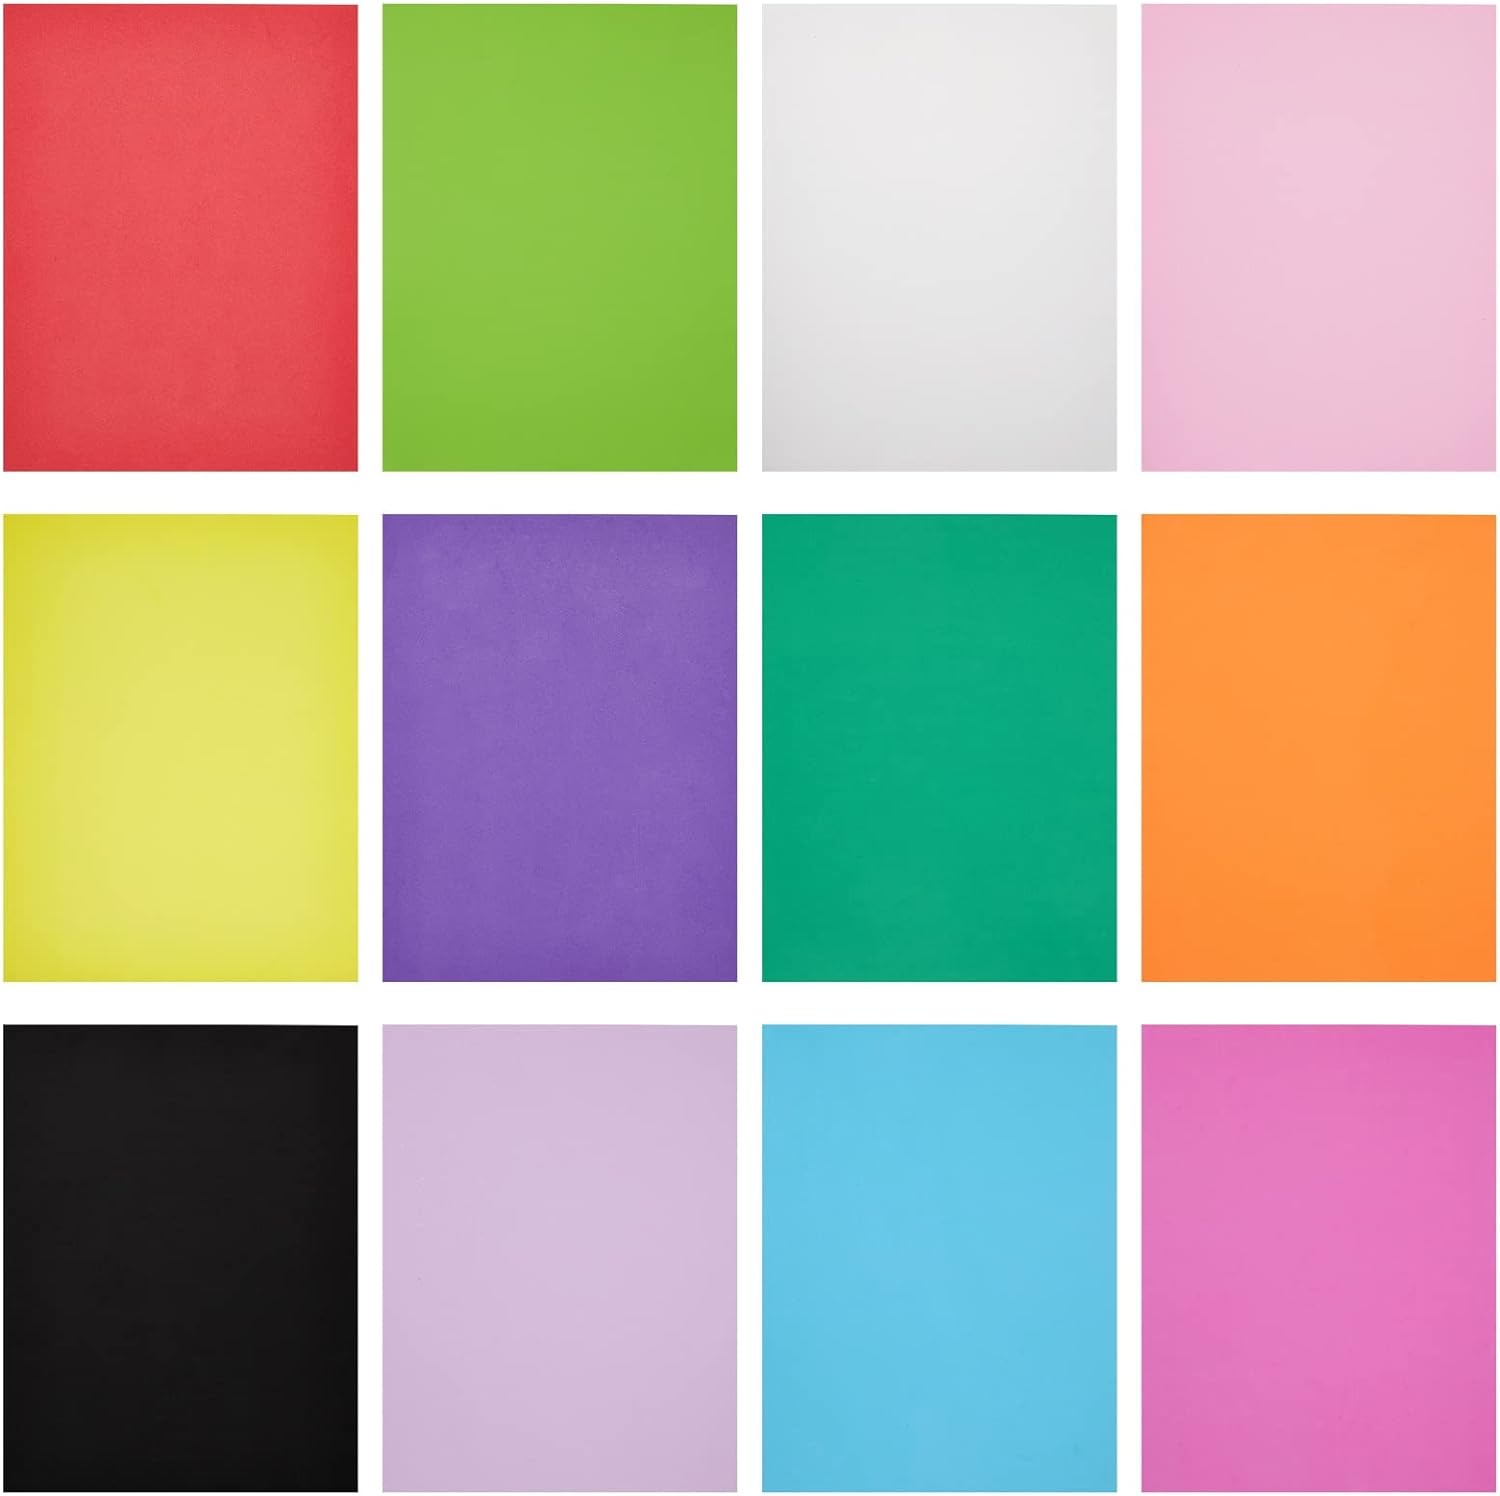 48 Pack Multicolored 2mm Eva Foam Paper Sheets For DIY Cosplay Costumes Arts And Crafts Projects 9x12 inch By PAIDU